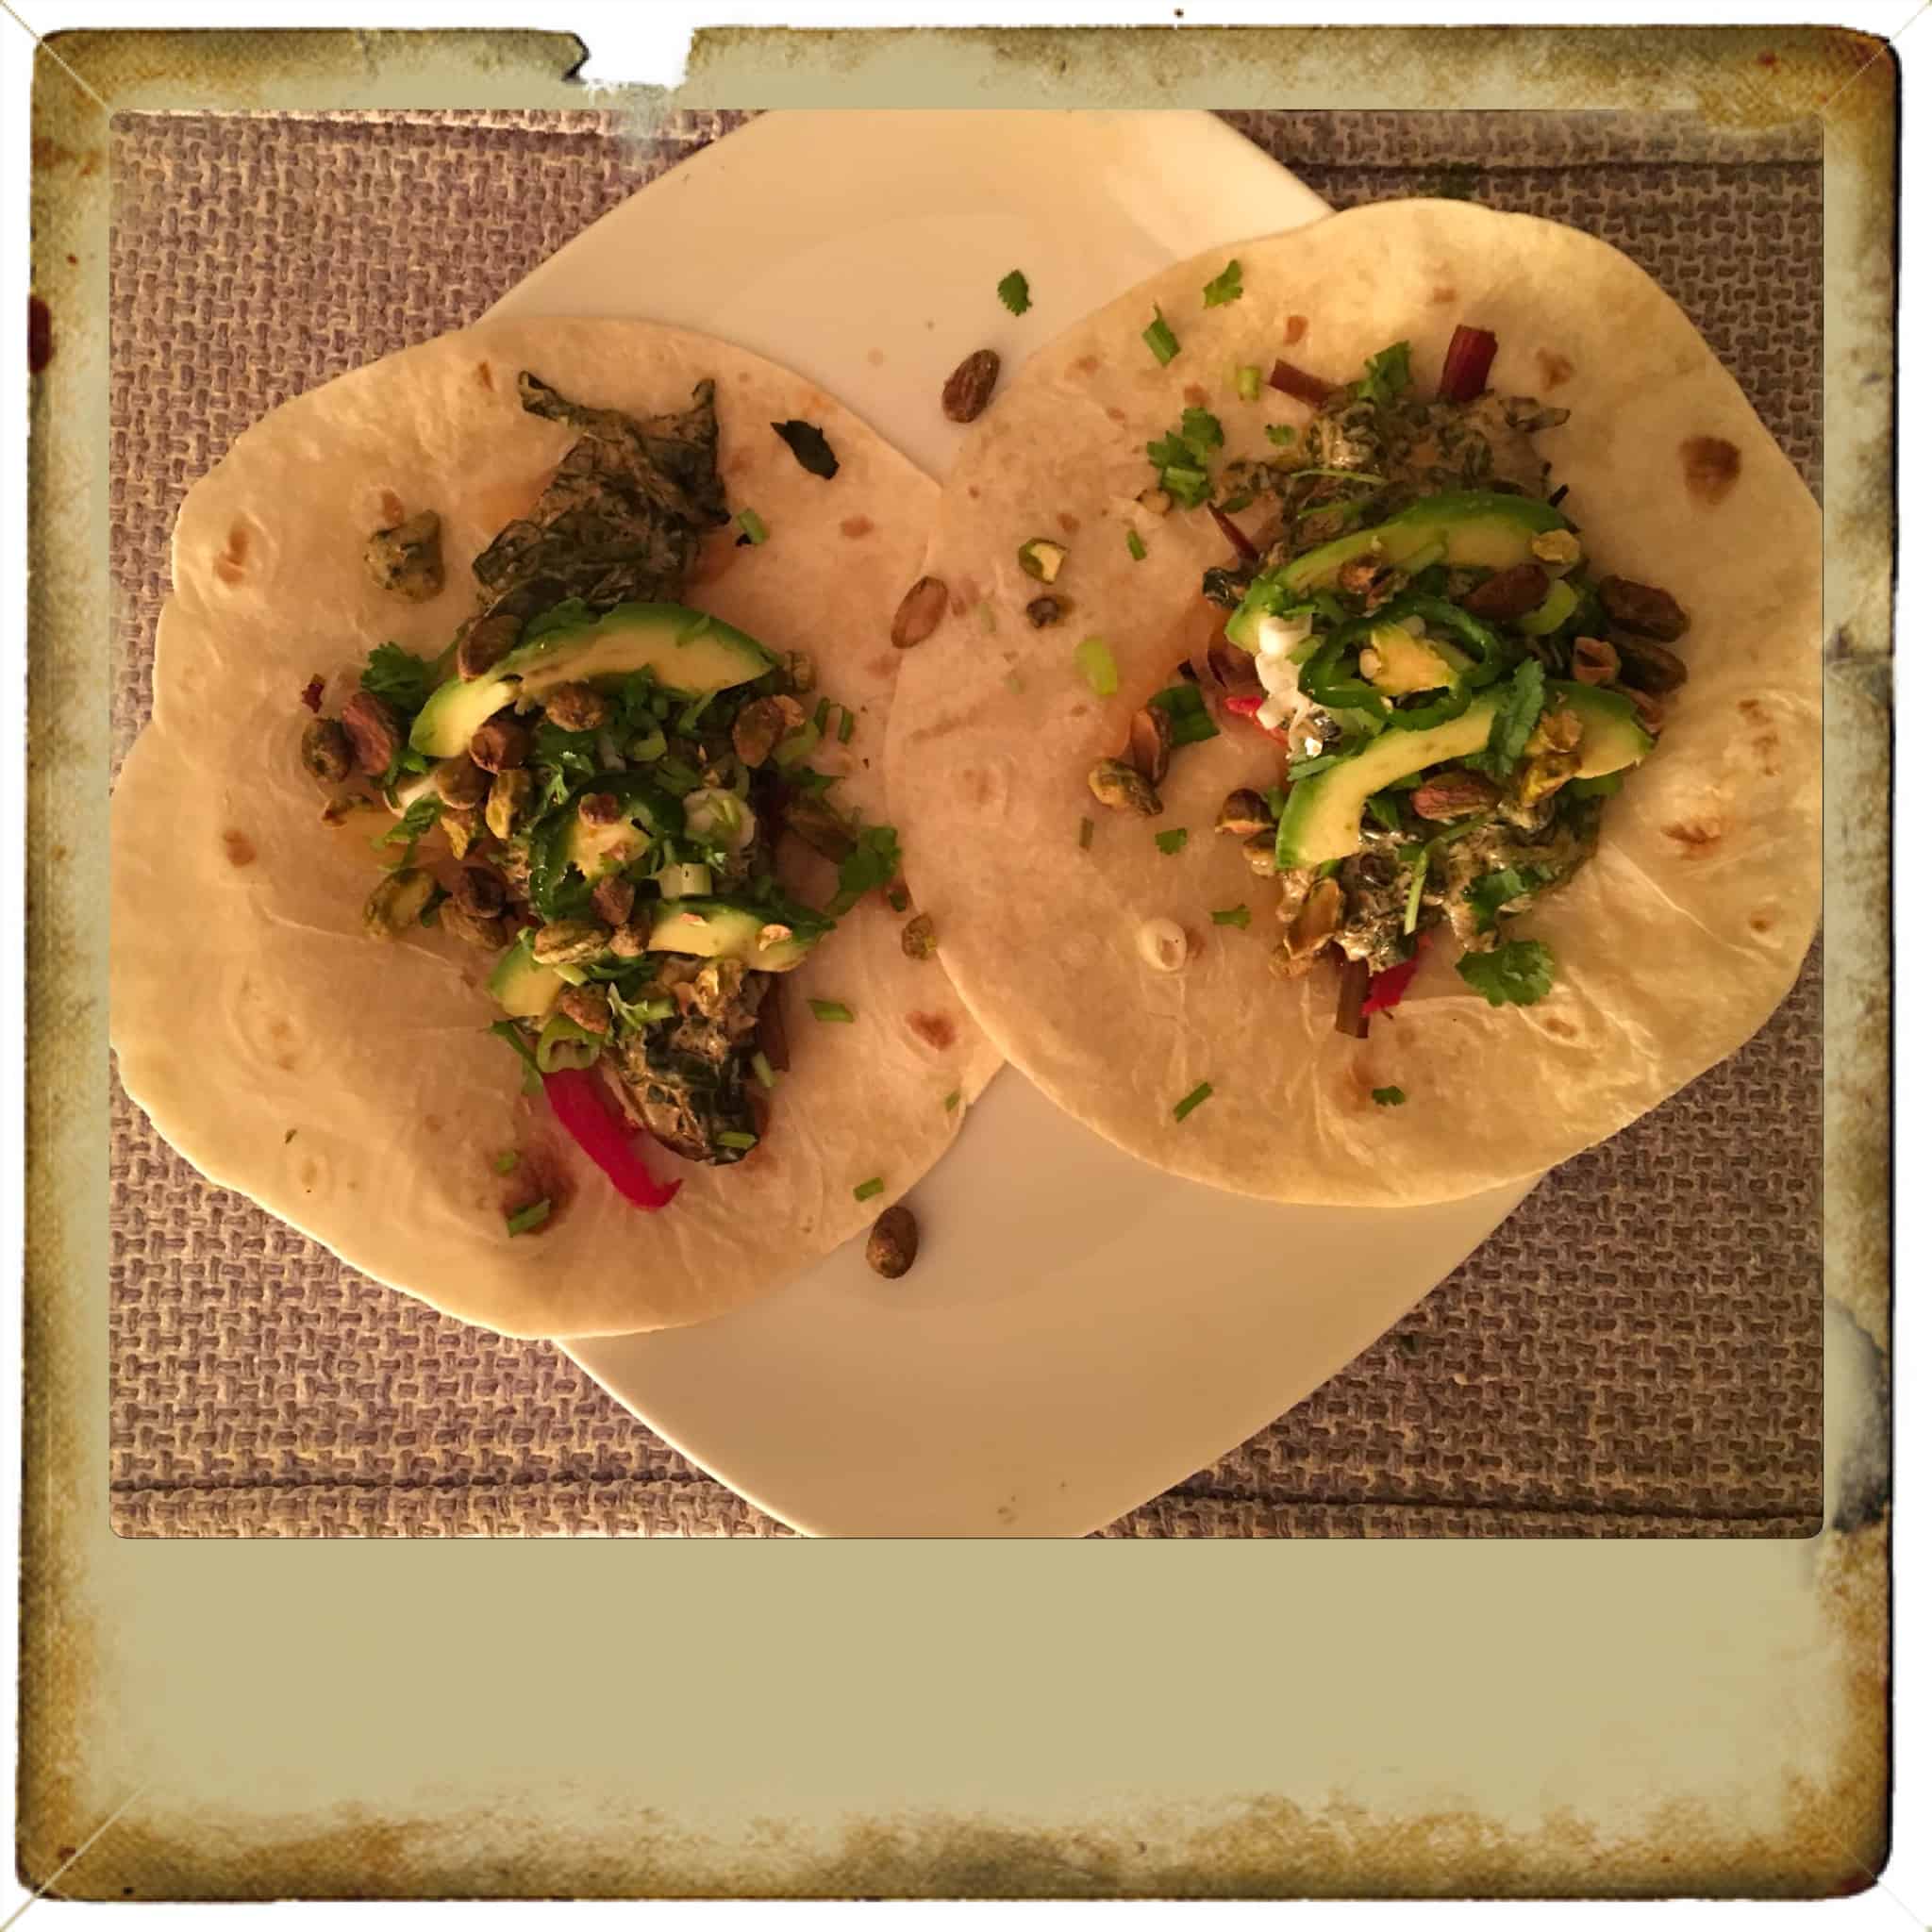 Taco Tuesday: Swiss Chard and Poblano Pepper Tacos